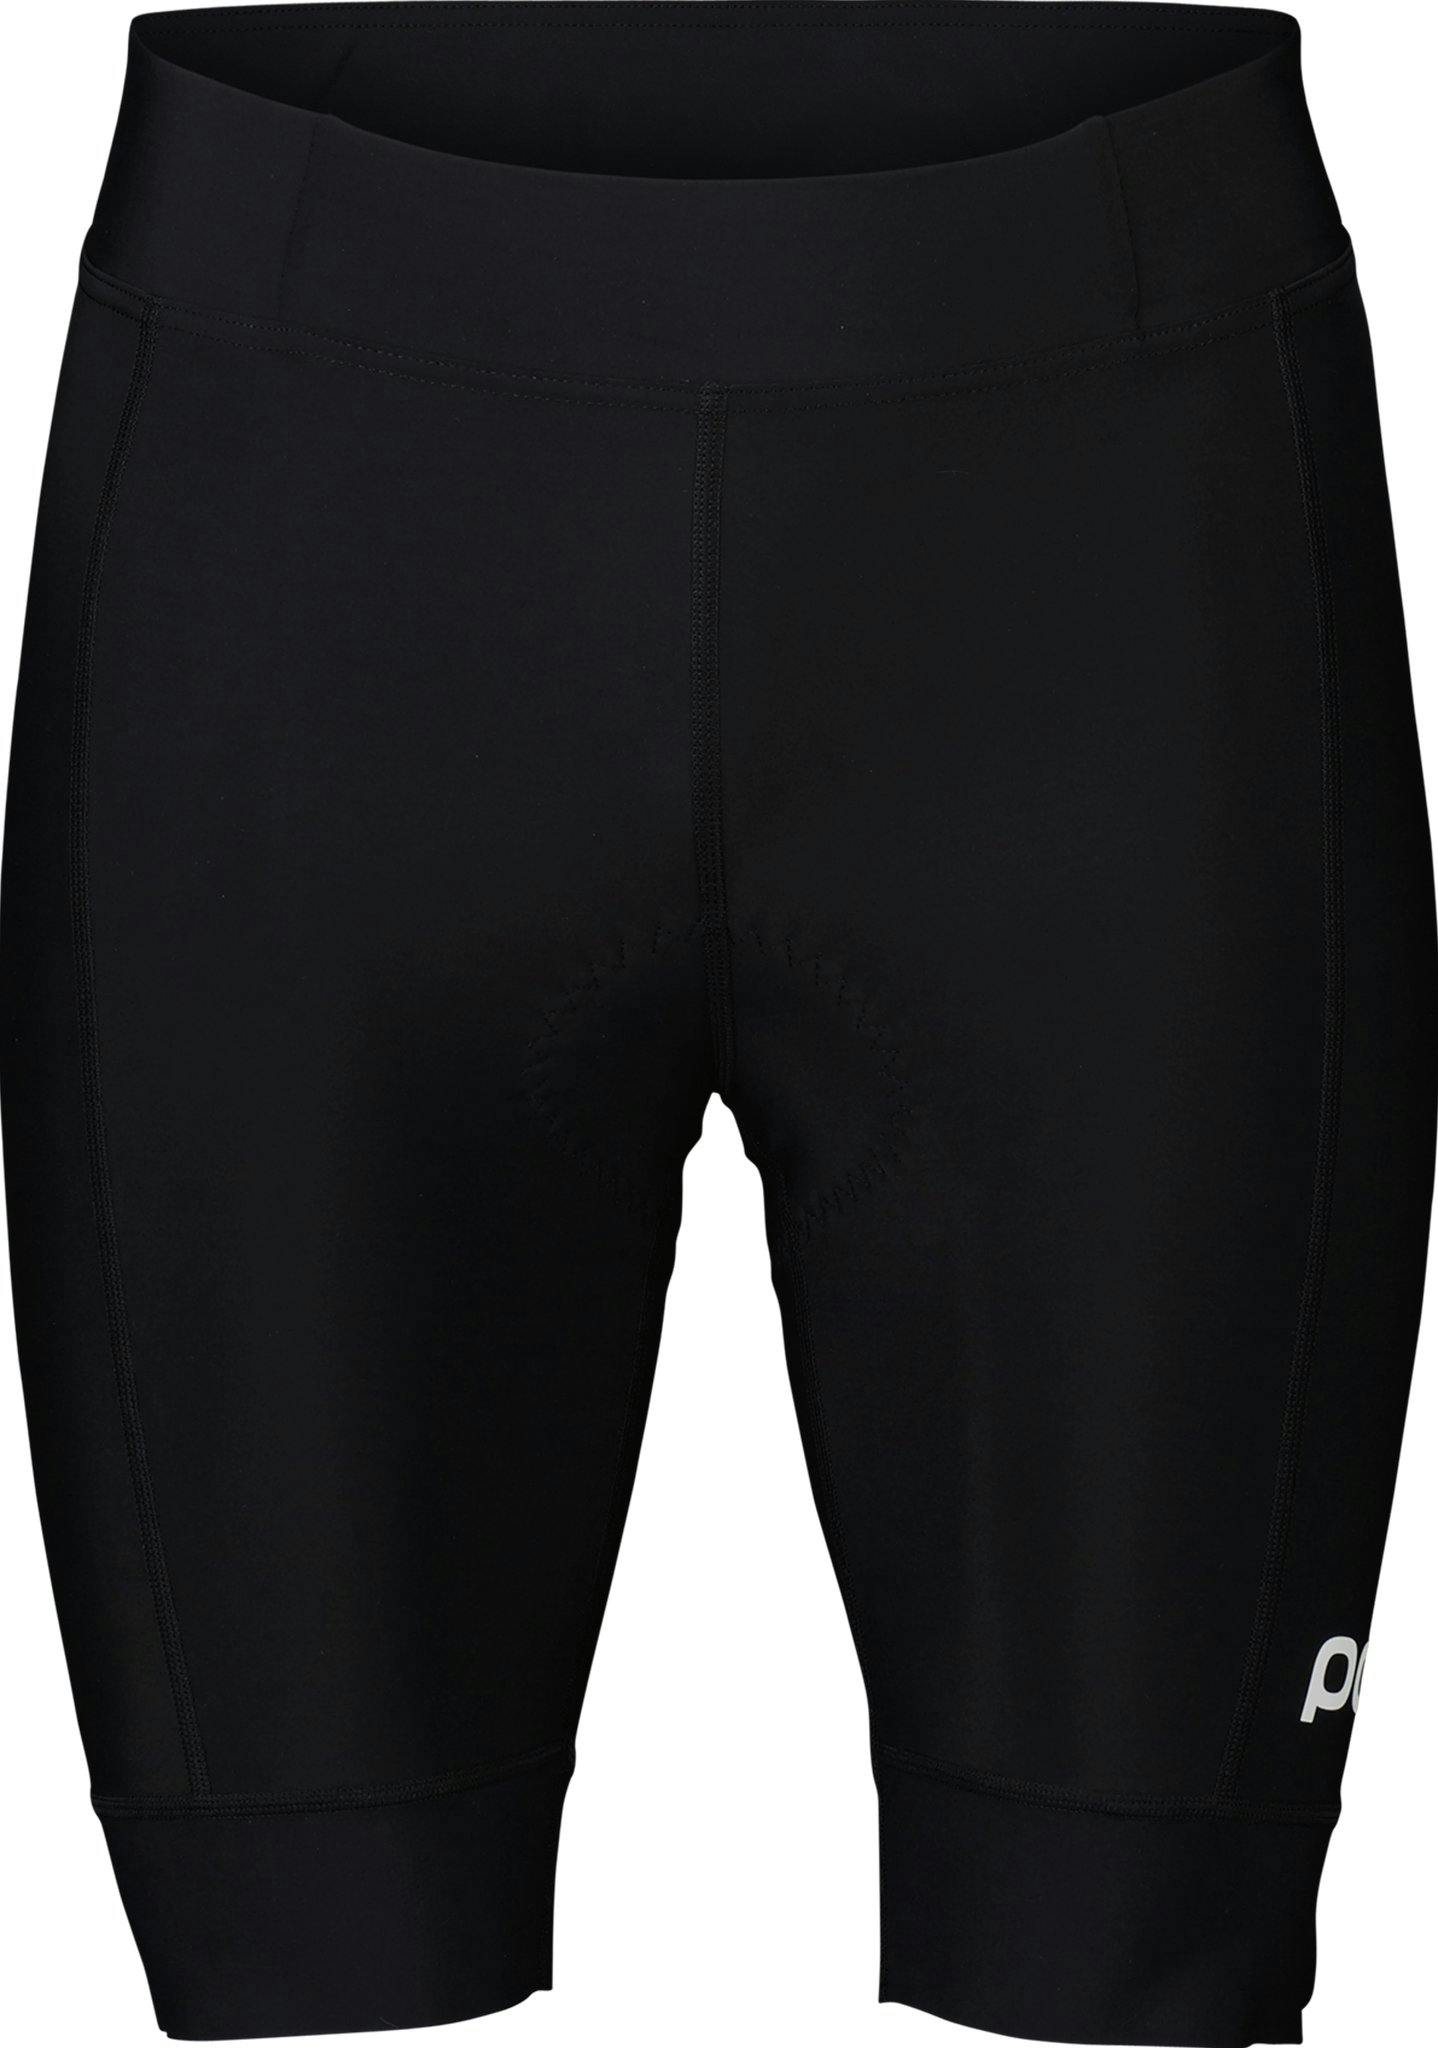 Product image for Air Indoor Shorts - Men's